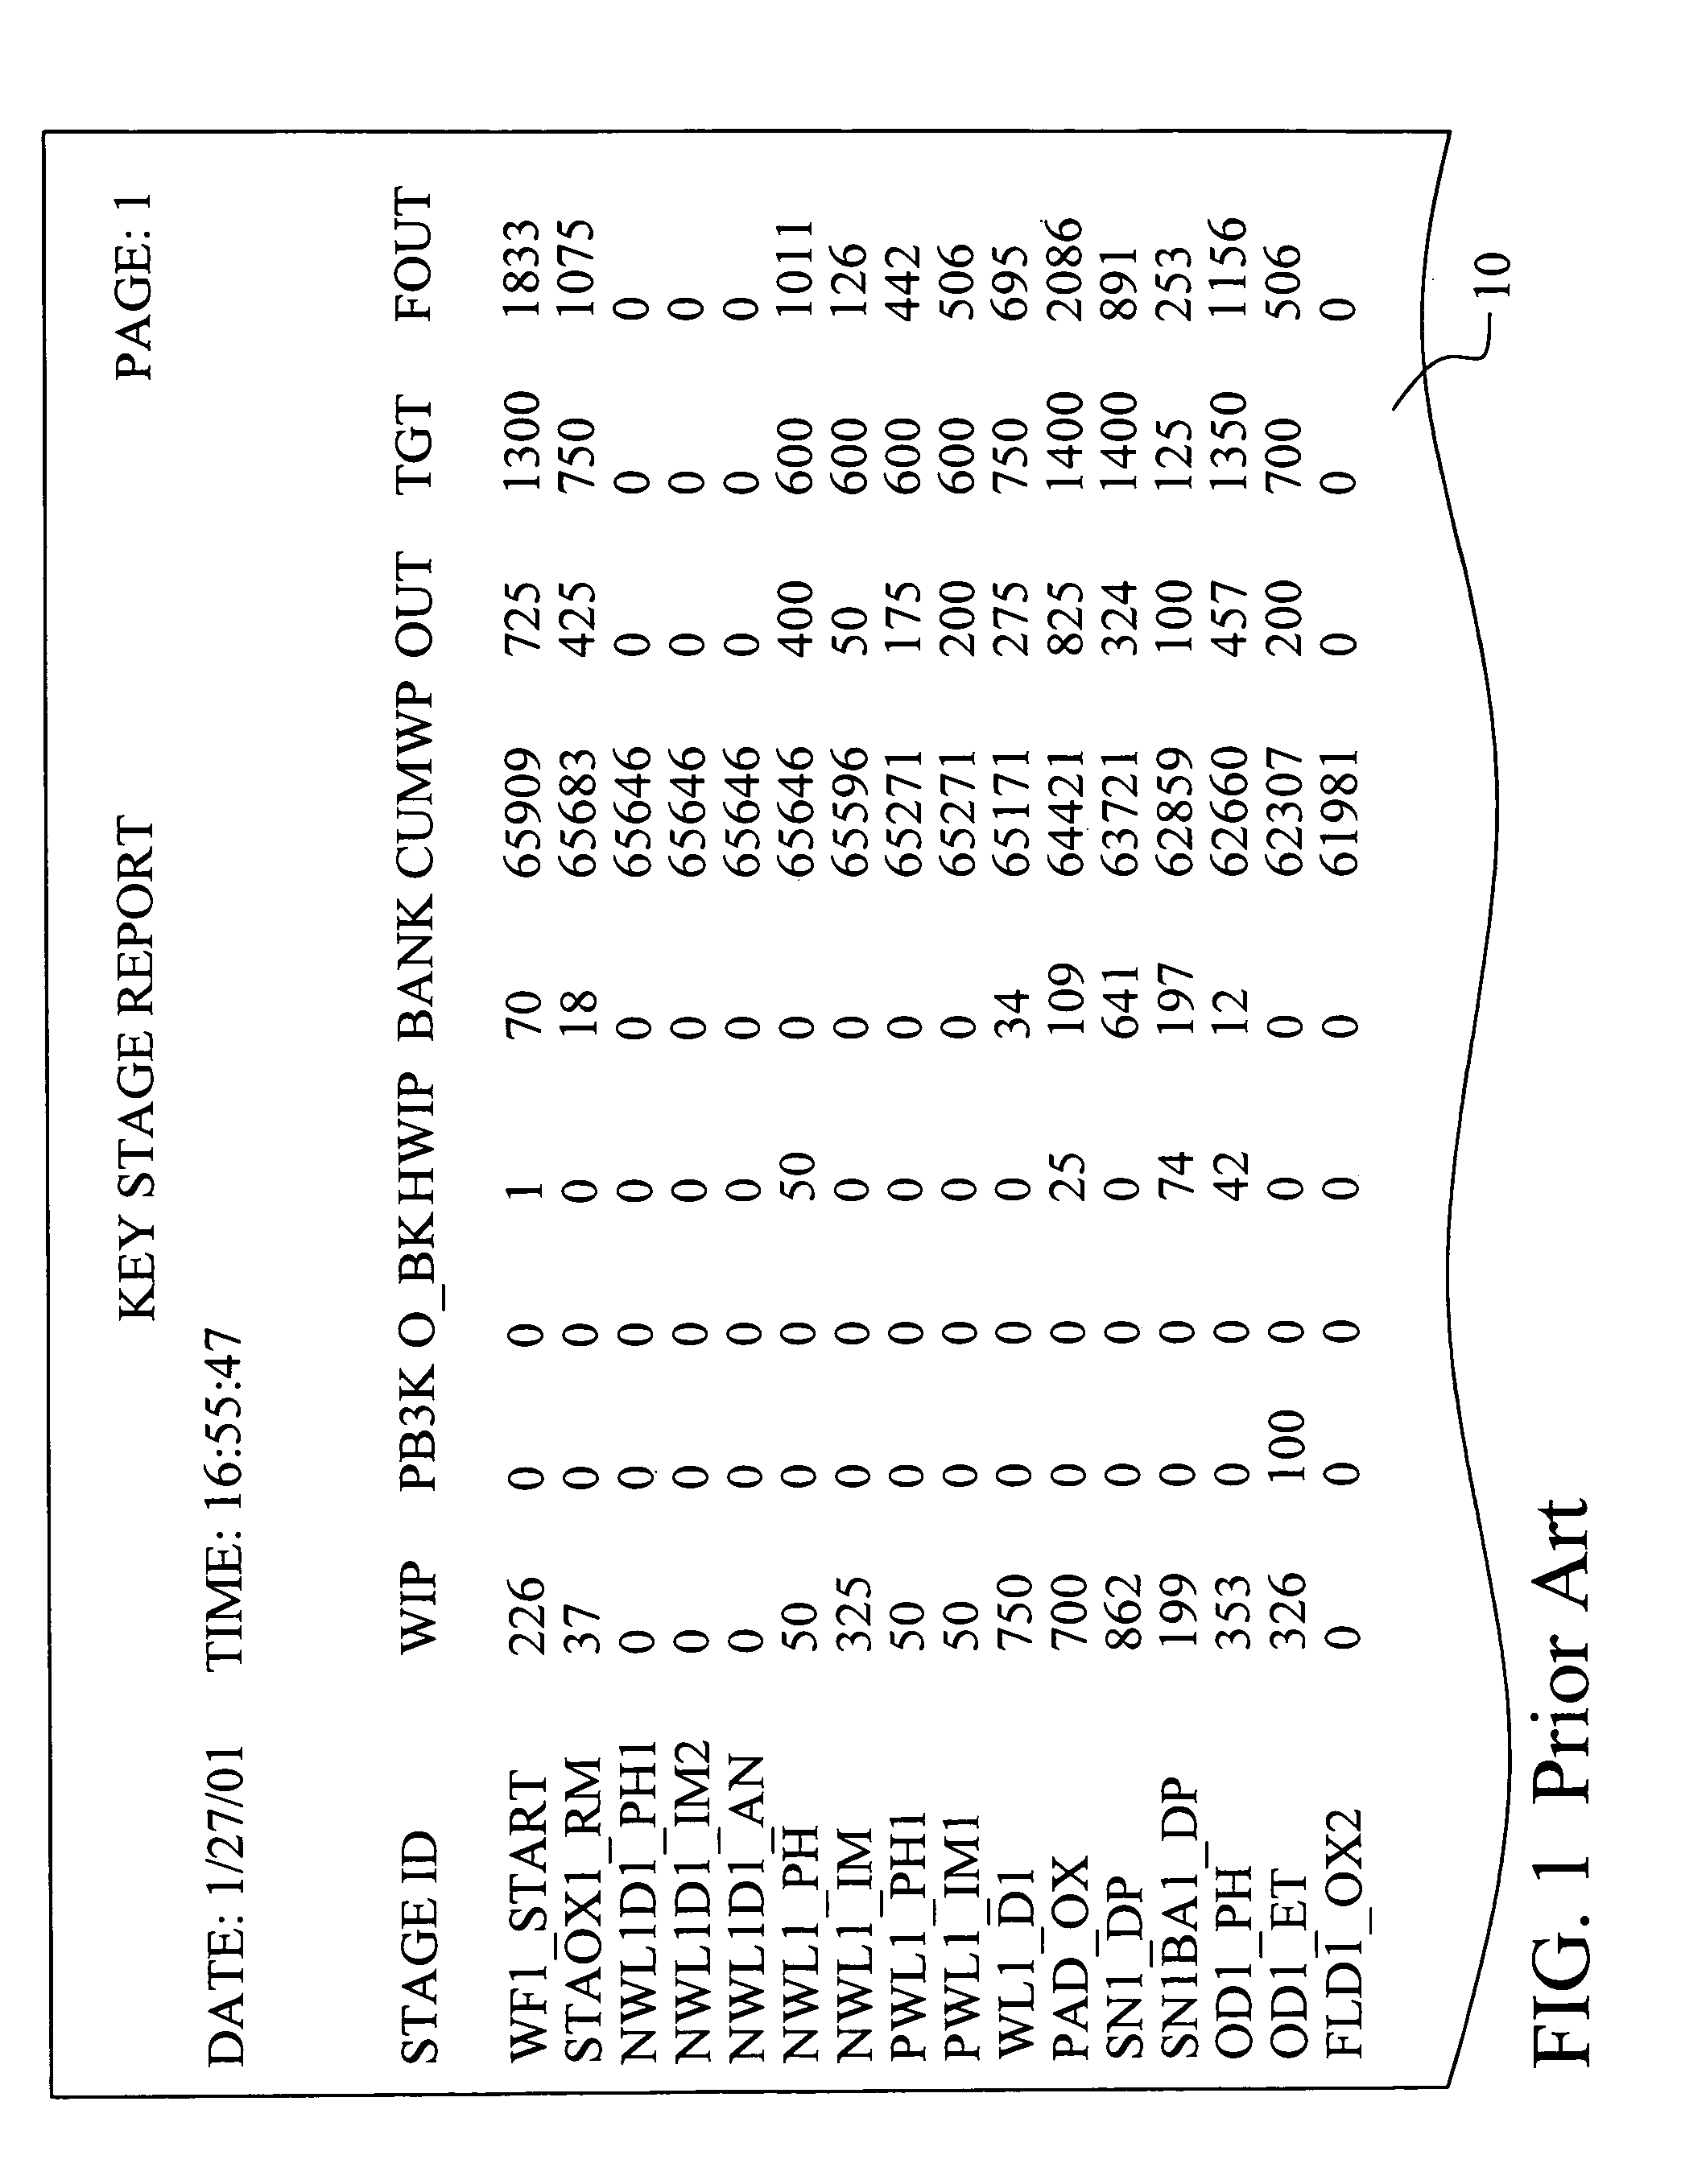 Method and apparatus for displaying production data for improved manufacturing decision making